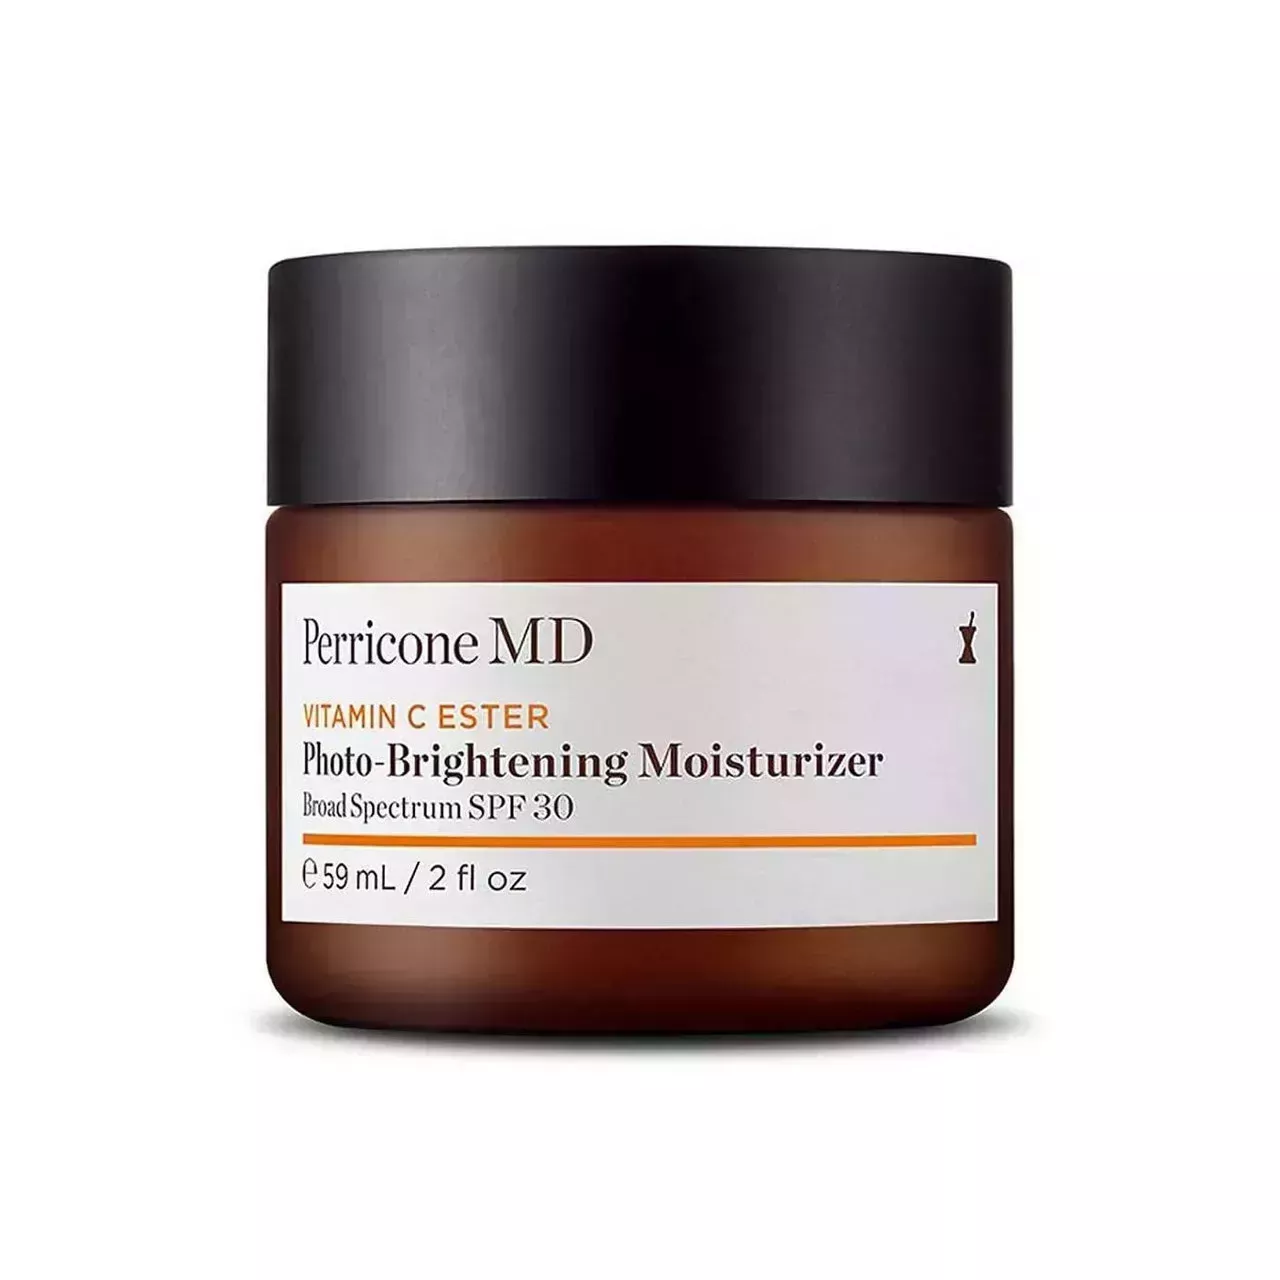 Perricone MD Vitamin C Ester Photo Brightening Moisturizer Broad Spectrum SPF 30 brown jar with white label and black lid on white background